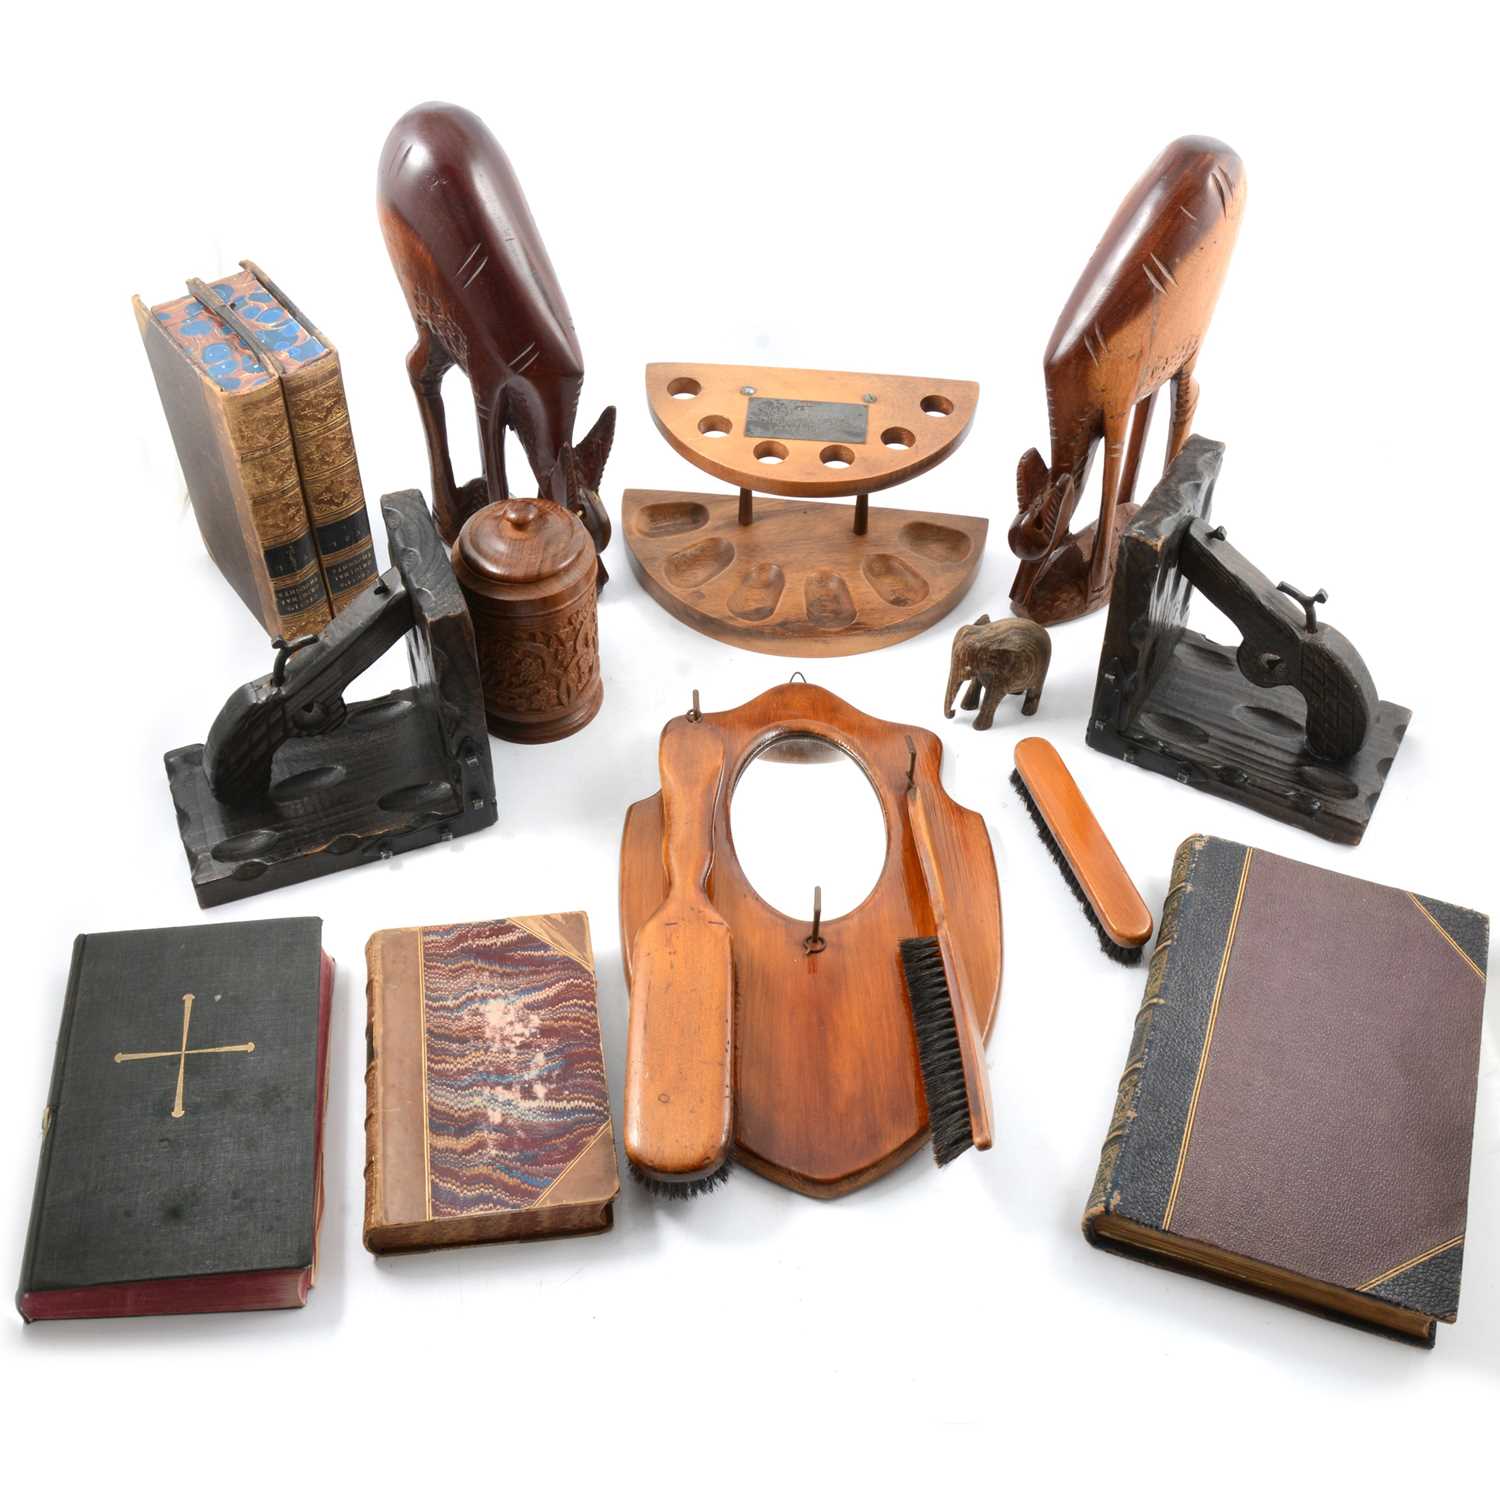 Lot 100 - Wooden 'pistol' bookends, hanging mirror and brush set, and other wooden items and books.